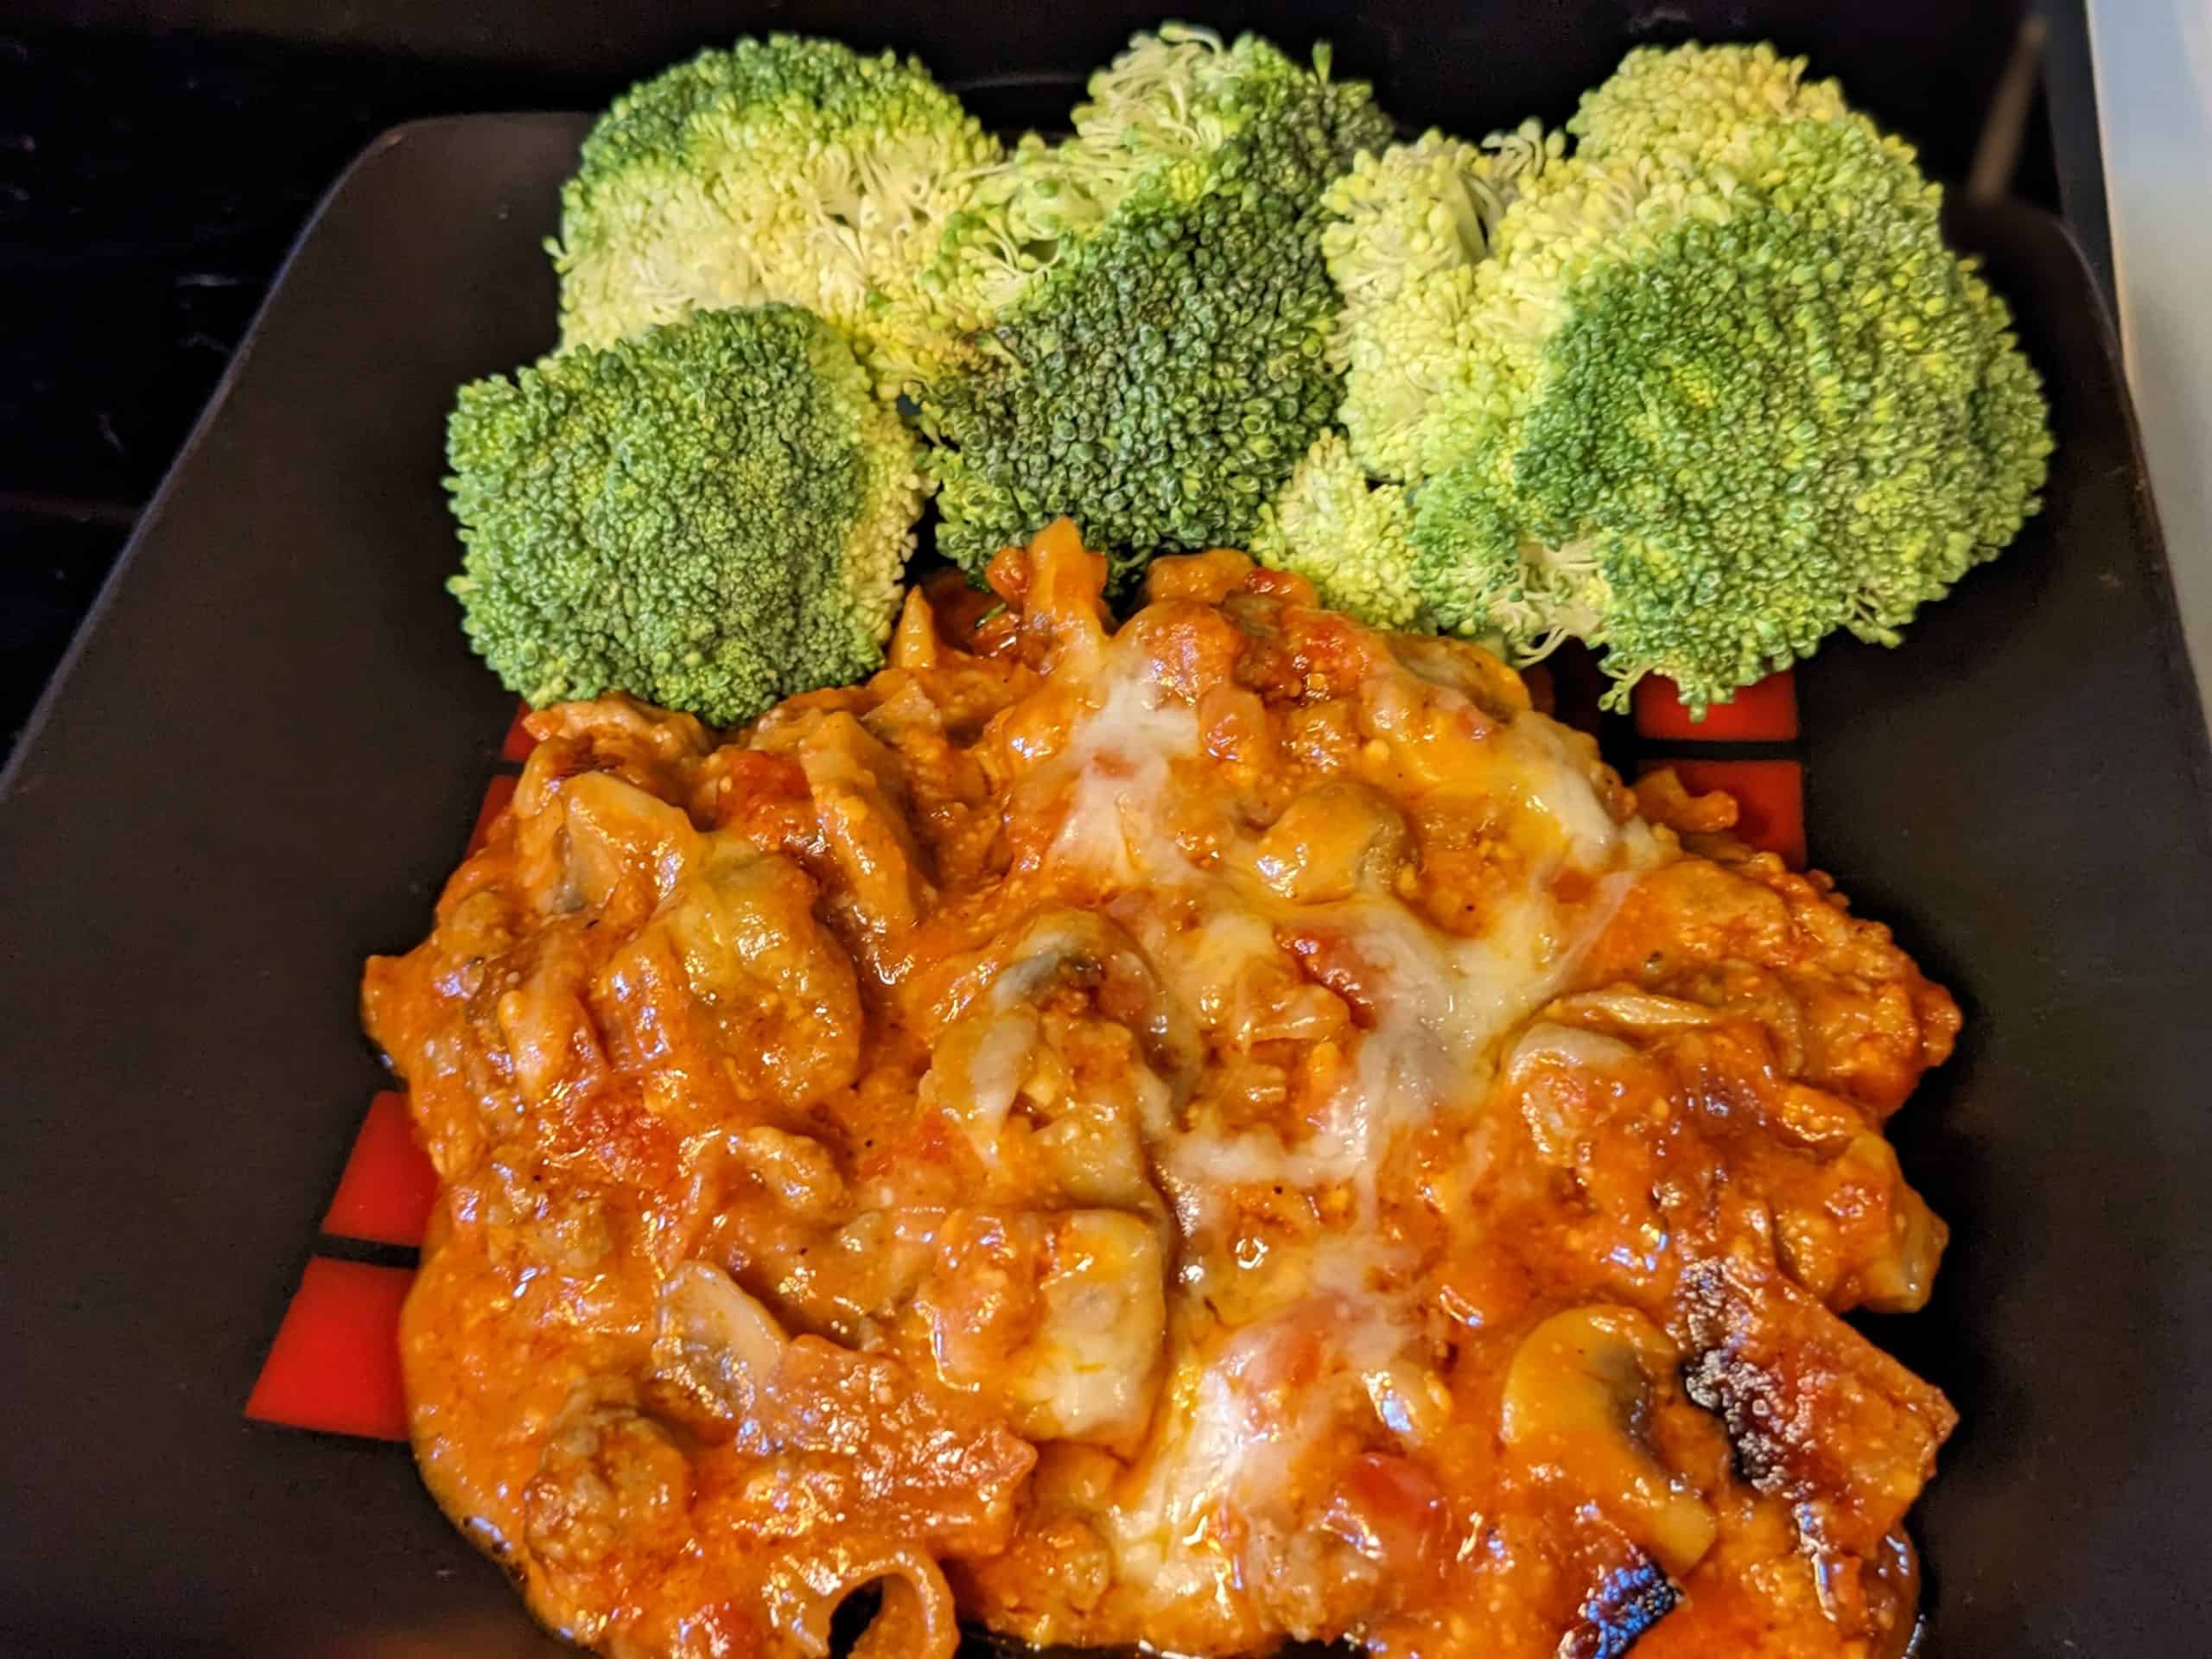 Keto Pizza Casserole - finished and plated